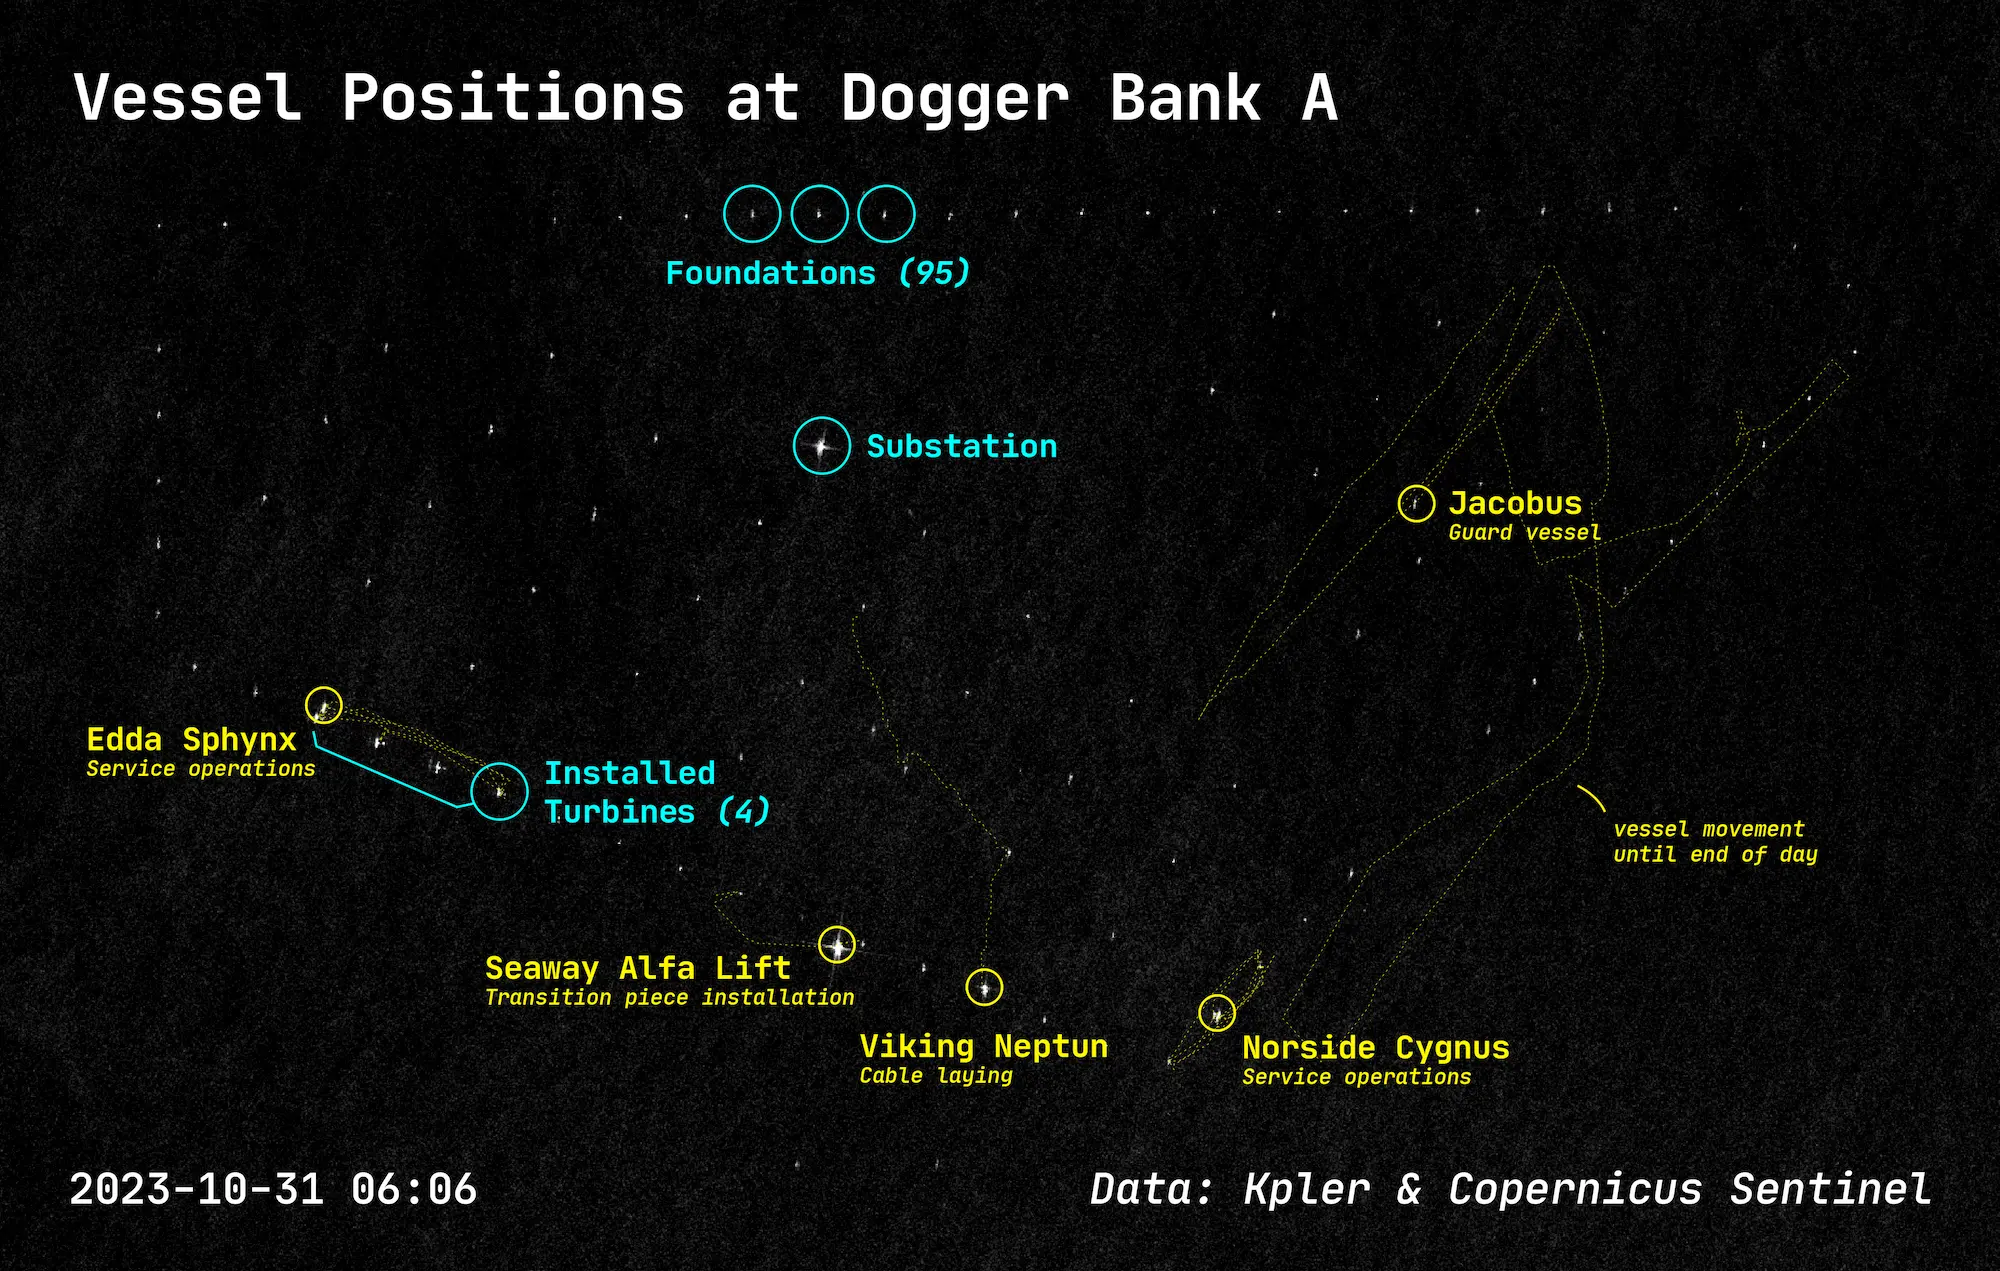 Vessel positions at Dogger Bank using AIS and SAR imagery